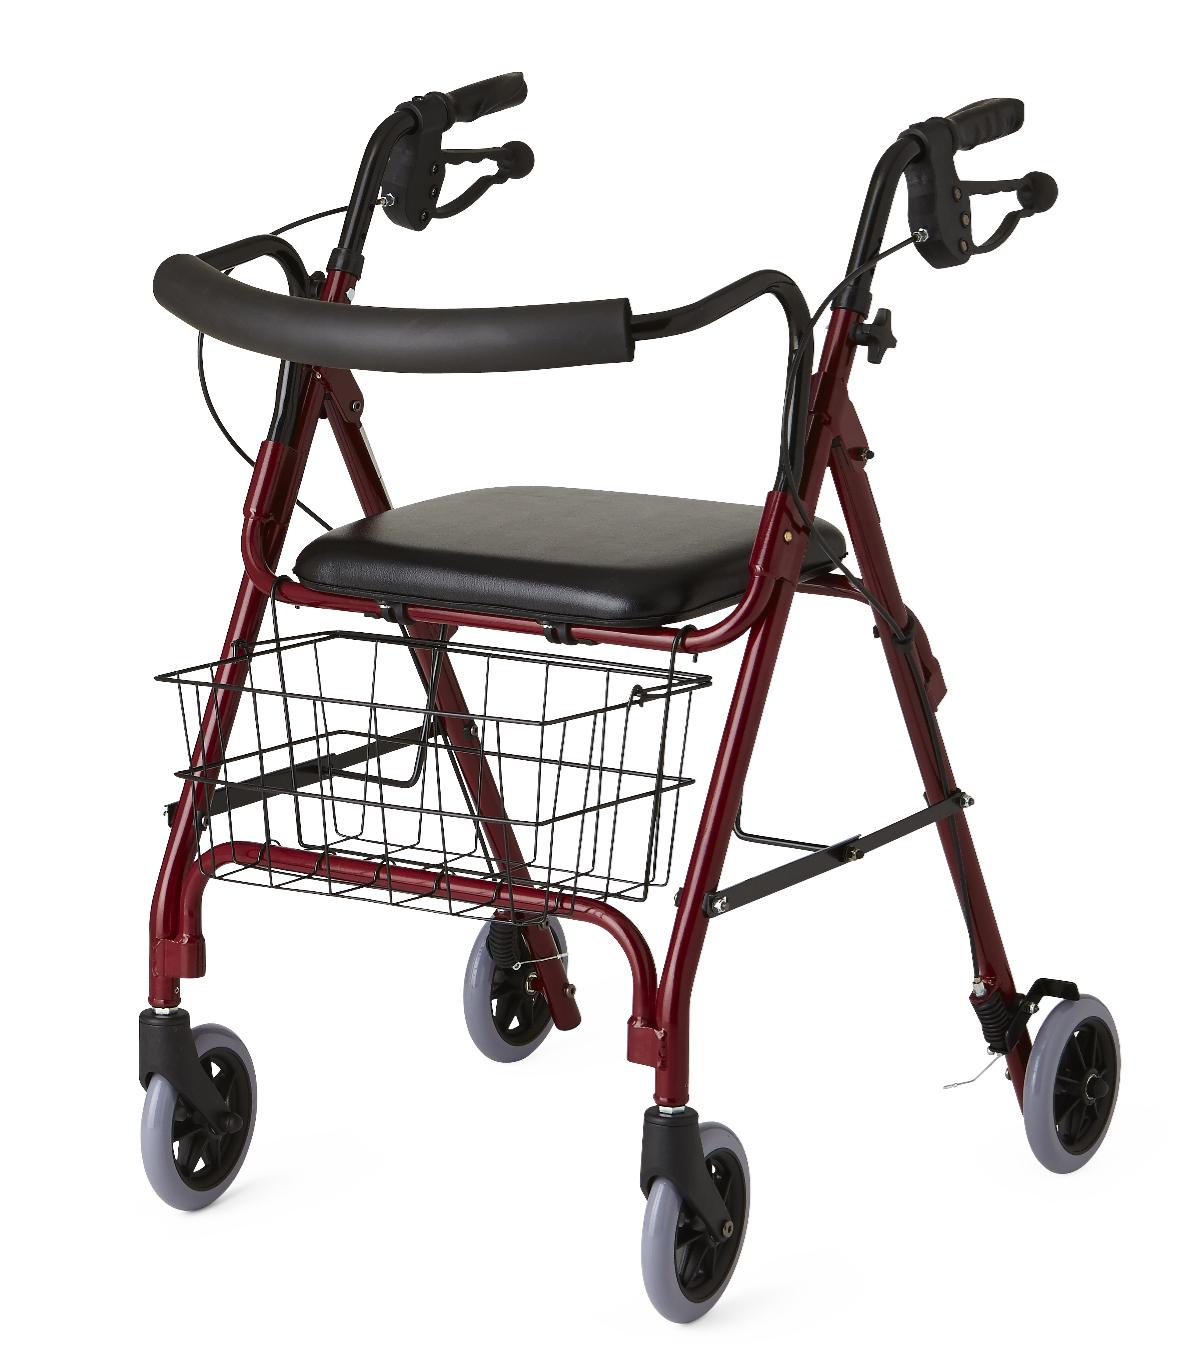 1 Each-Case / Burgundy / 6.000 IN Patient Safety & Mobility - MEDLINE - Wasatch Medical Supply